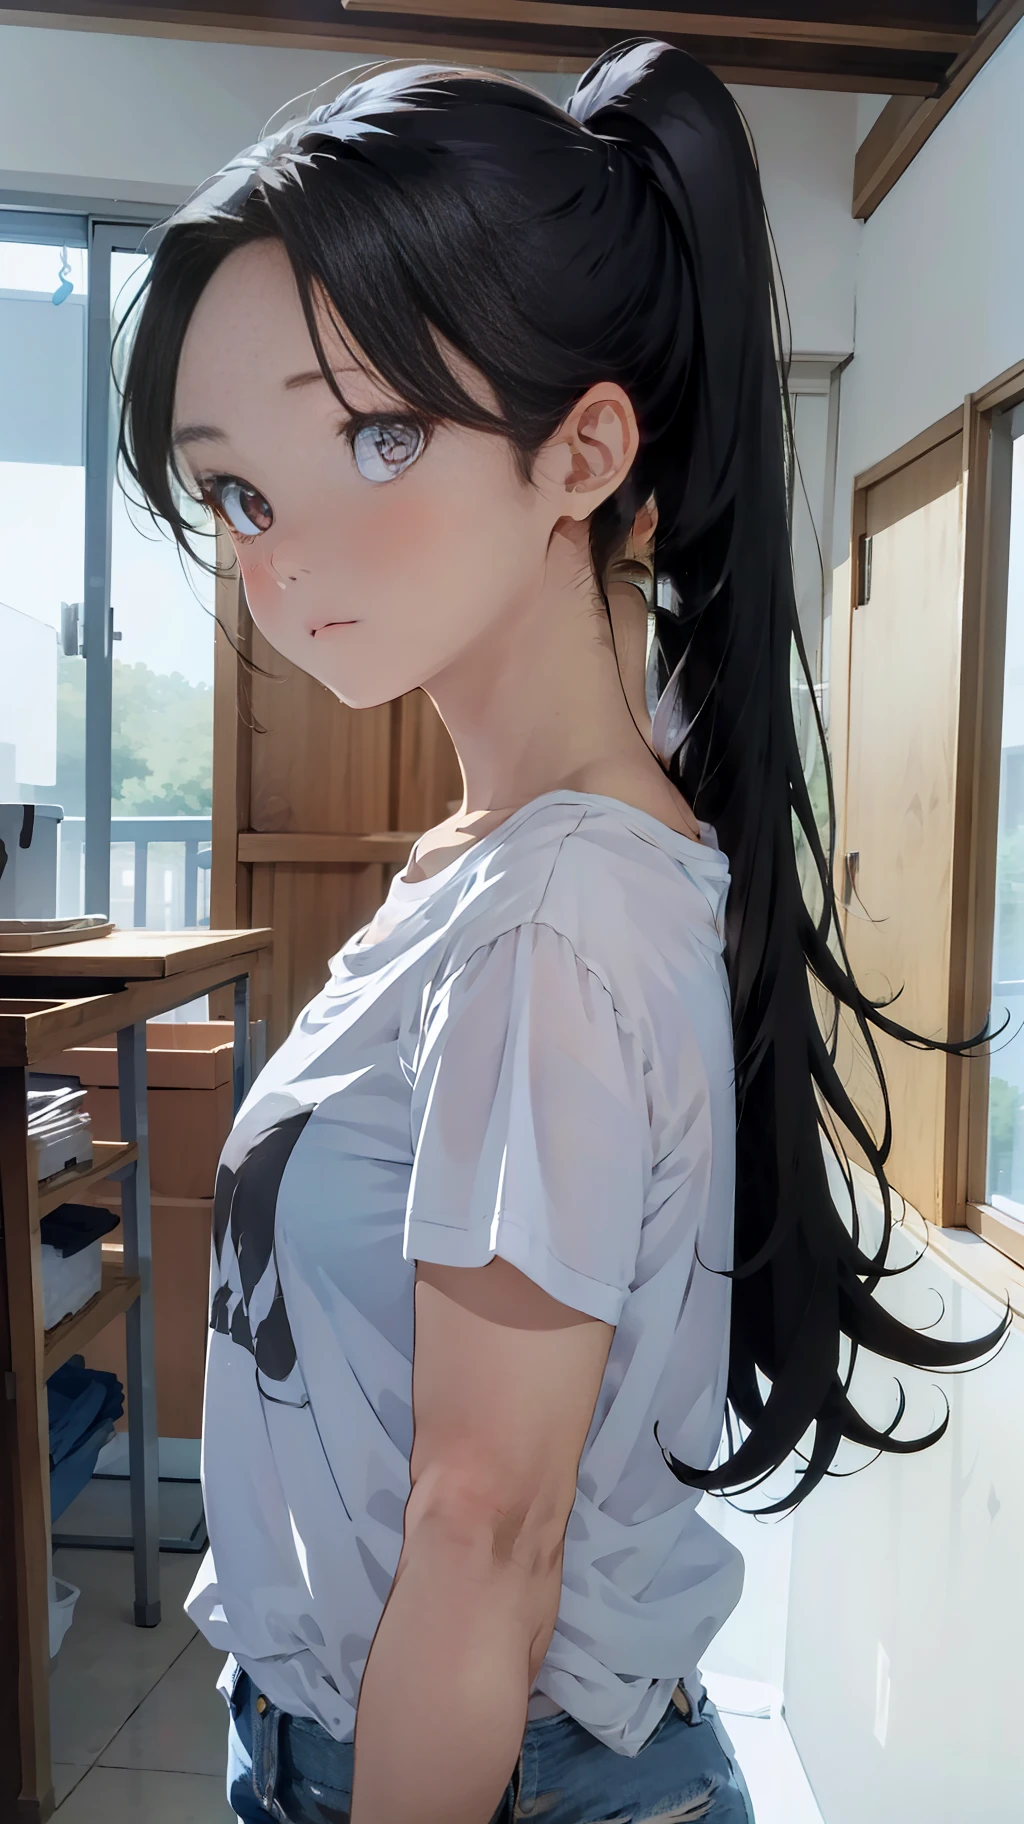 one woman, standing, tall of a person,white t-shirt,blue jeans,thin,gleaming skin,beautiful face,sharp eyes,flushed cheeks,cool,long hair,pony tale, black hair,slender face,indoor,illustration style,anime style,masterpiece, extremely fine and beautiful,illustration,adult woman